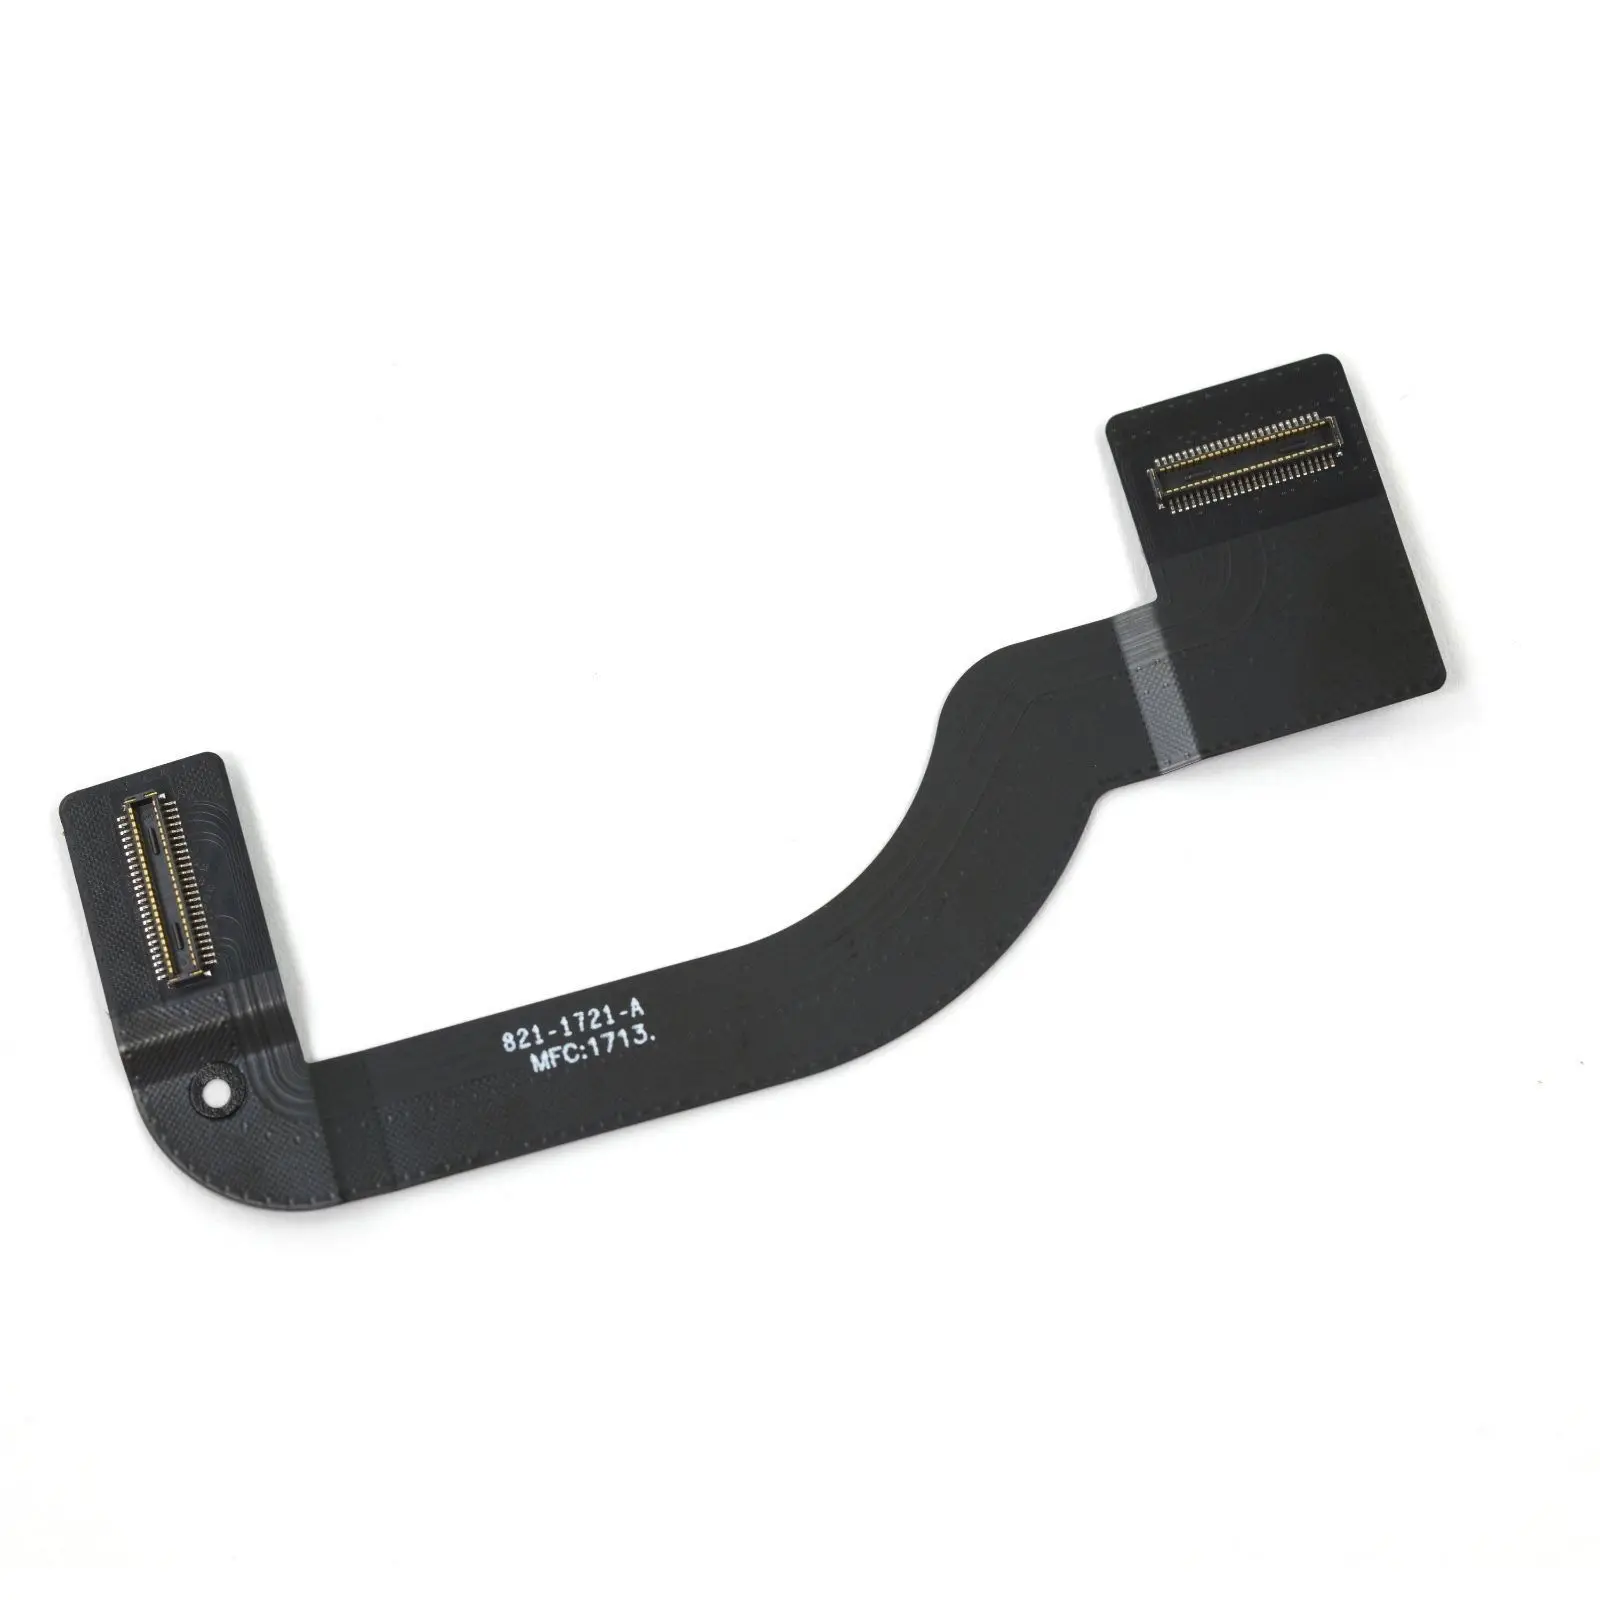 

Computer Parts Dc Power Board Flex Cable 821-1721-A For Apple Macbook Air 11" A1465 2013~2015